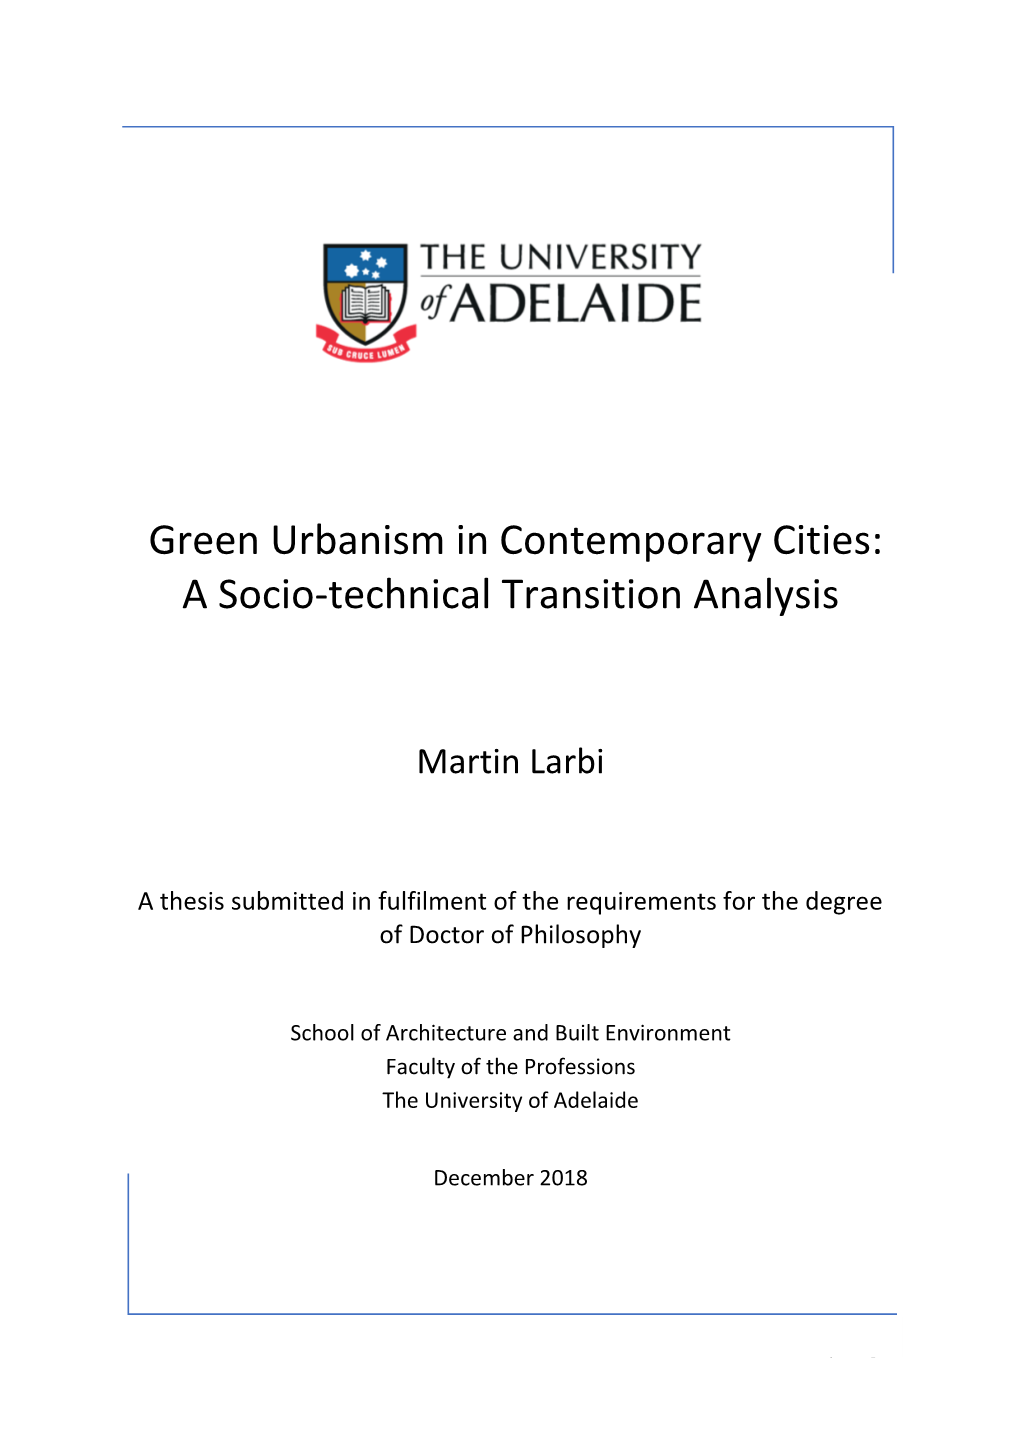 Green Urbanism in Contemporary Cities: a Socio-Technical Transition Analysis